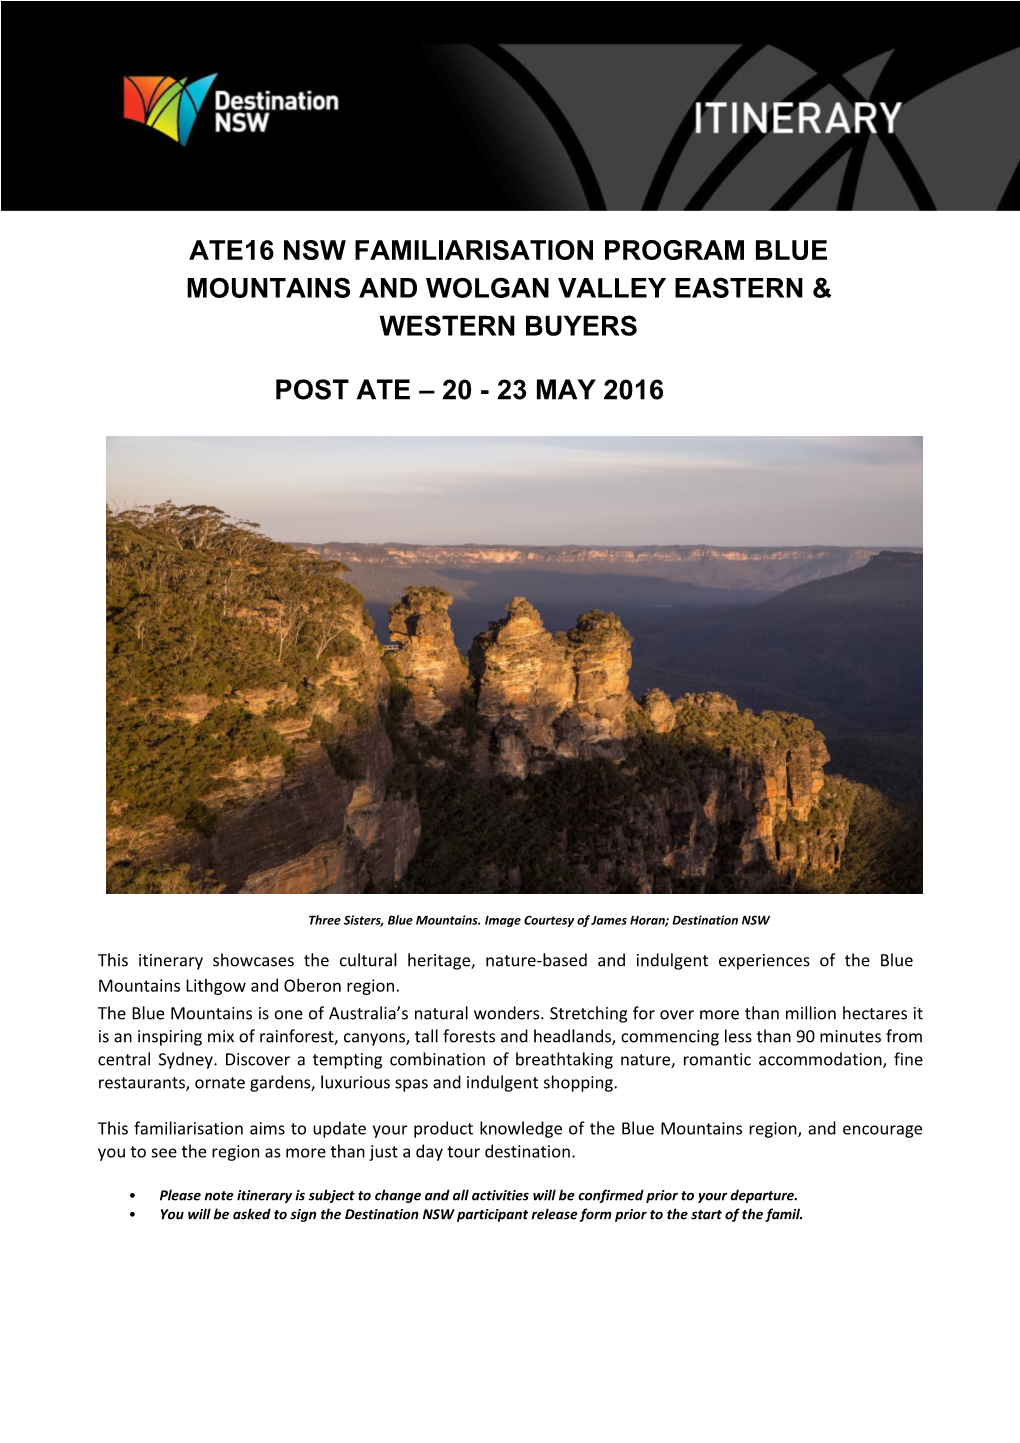 Blue Mountains and Wolgan Valley Eastern & Western Buyers